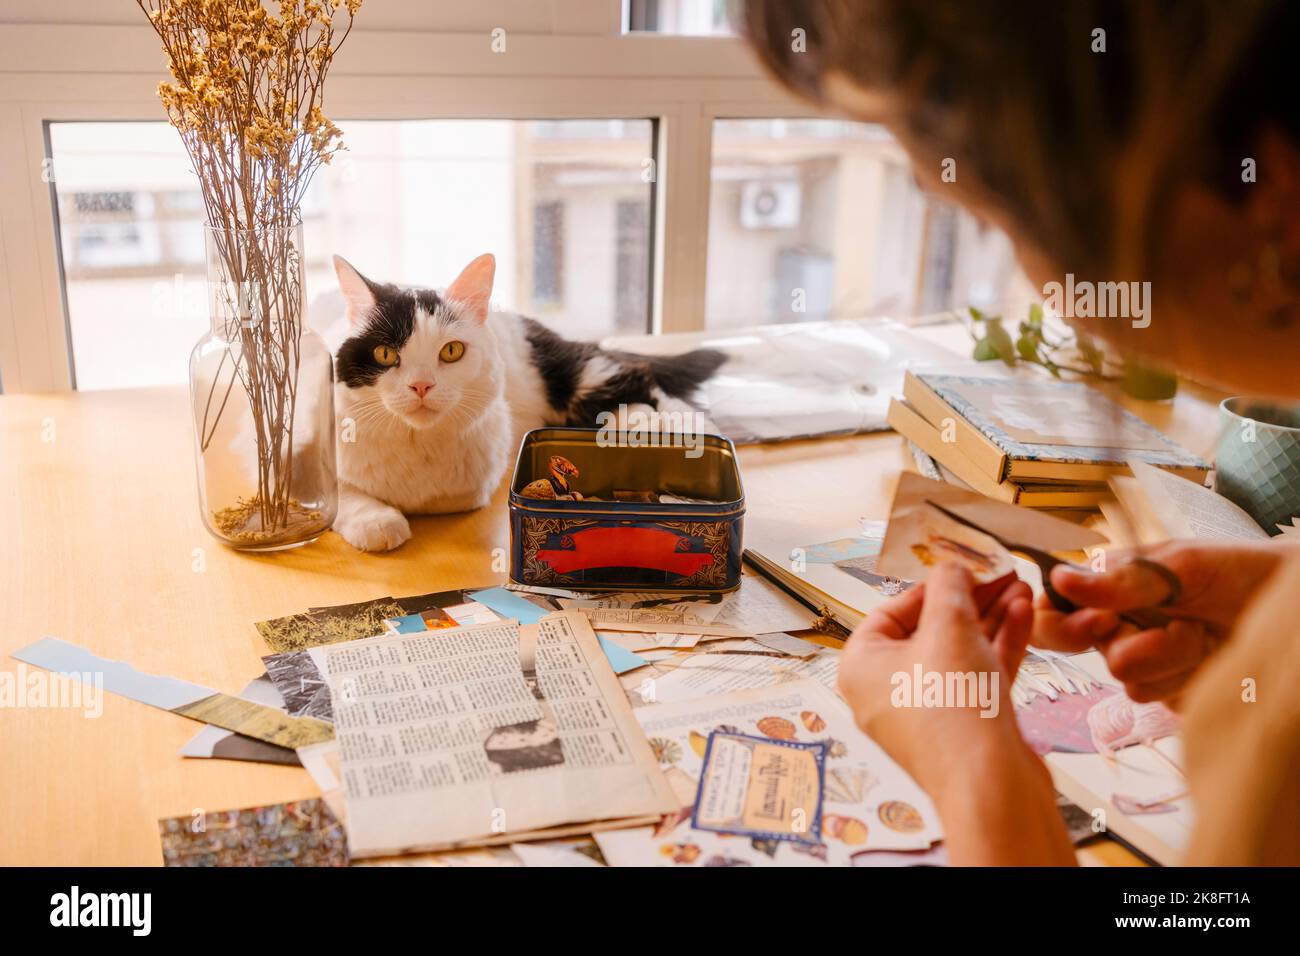 Freelancer cutting paper clipping by cat on desk at home Stock Photo